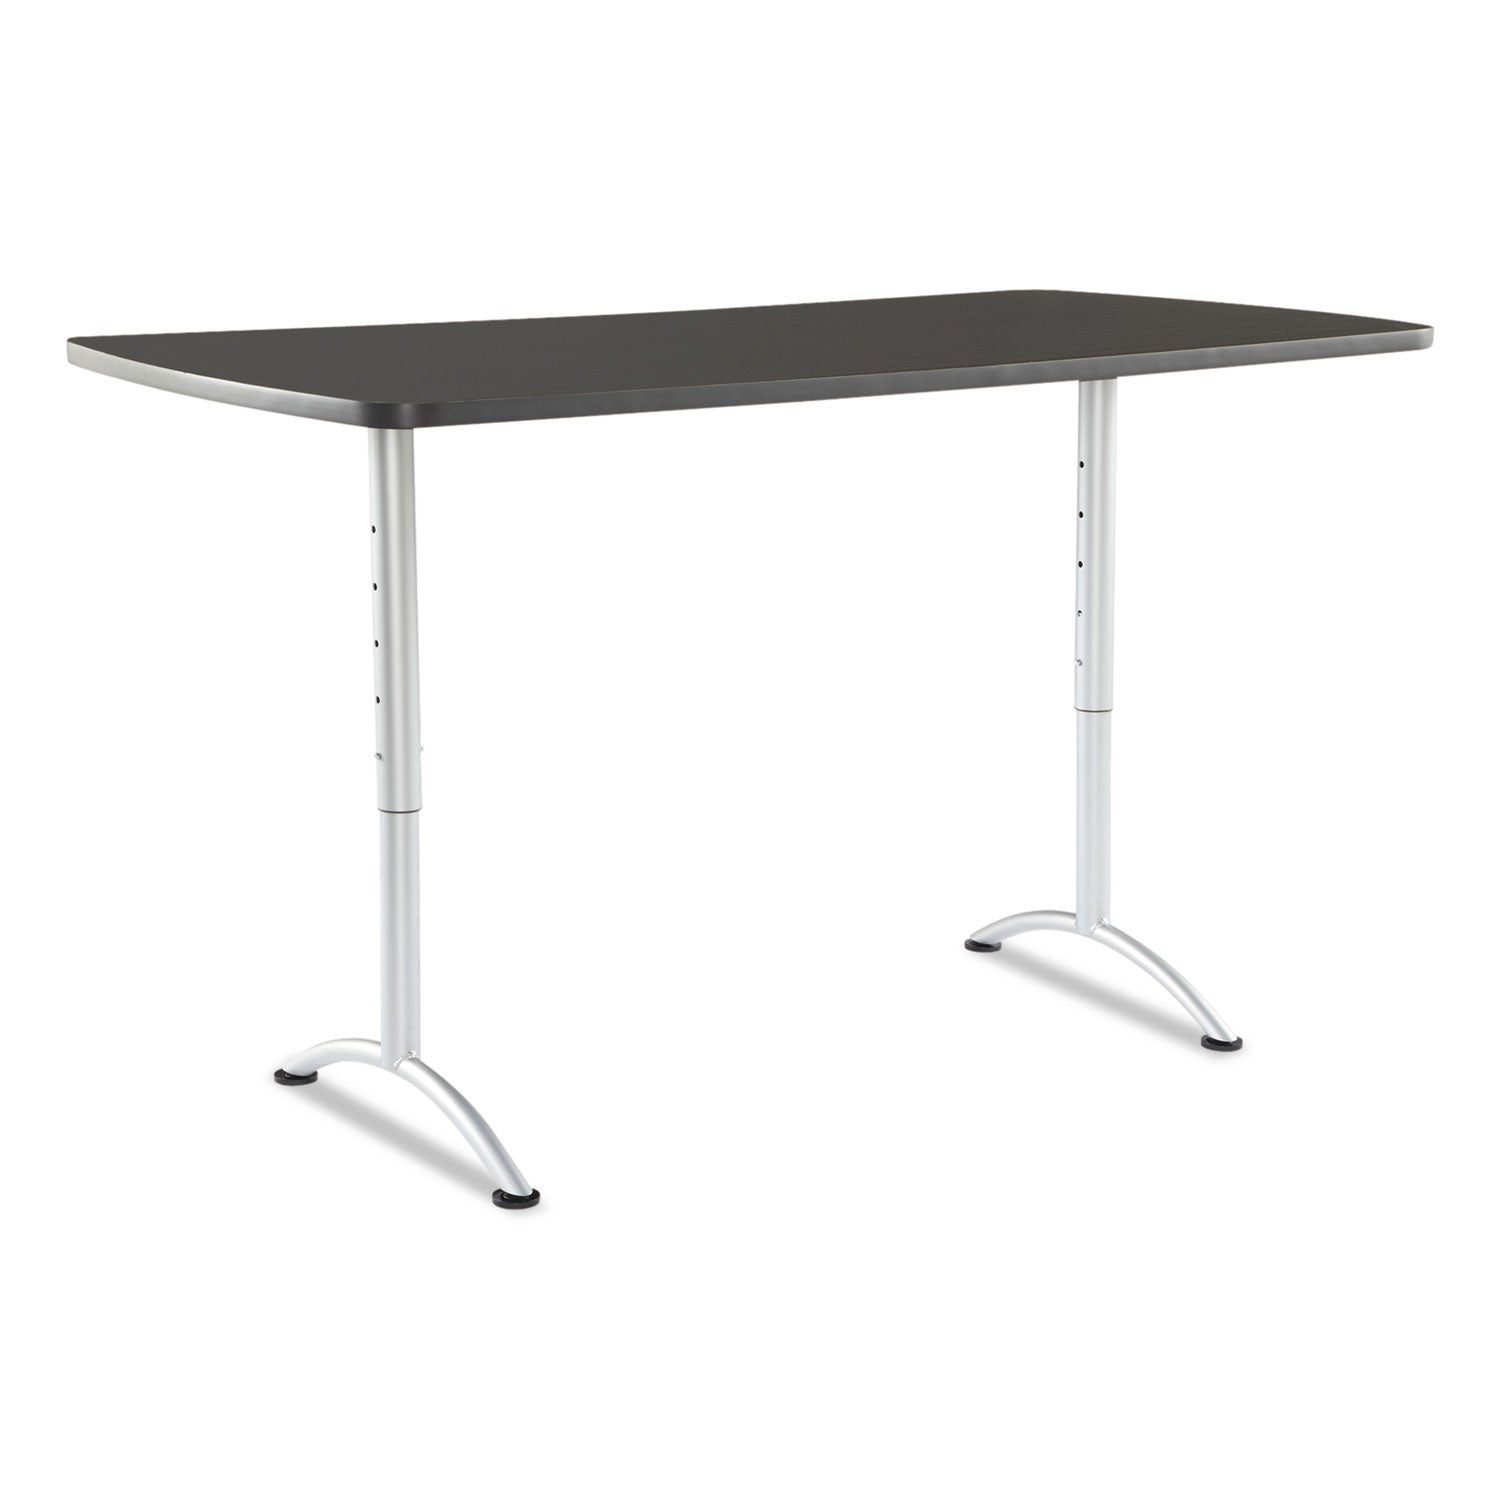 ARC Adjustable-Height Table, Rectangular, 36" x 72" x 30" to 42", Graphite Top, Silver Base - 